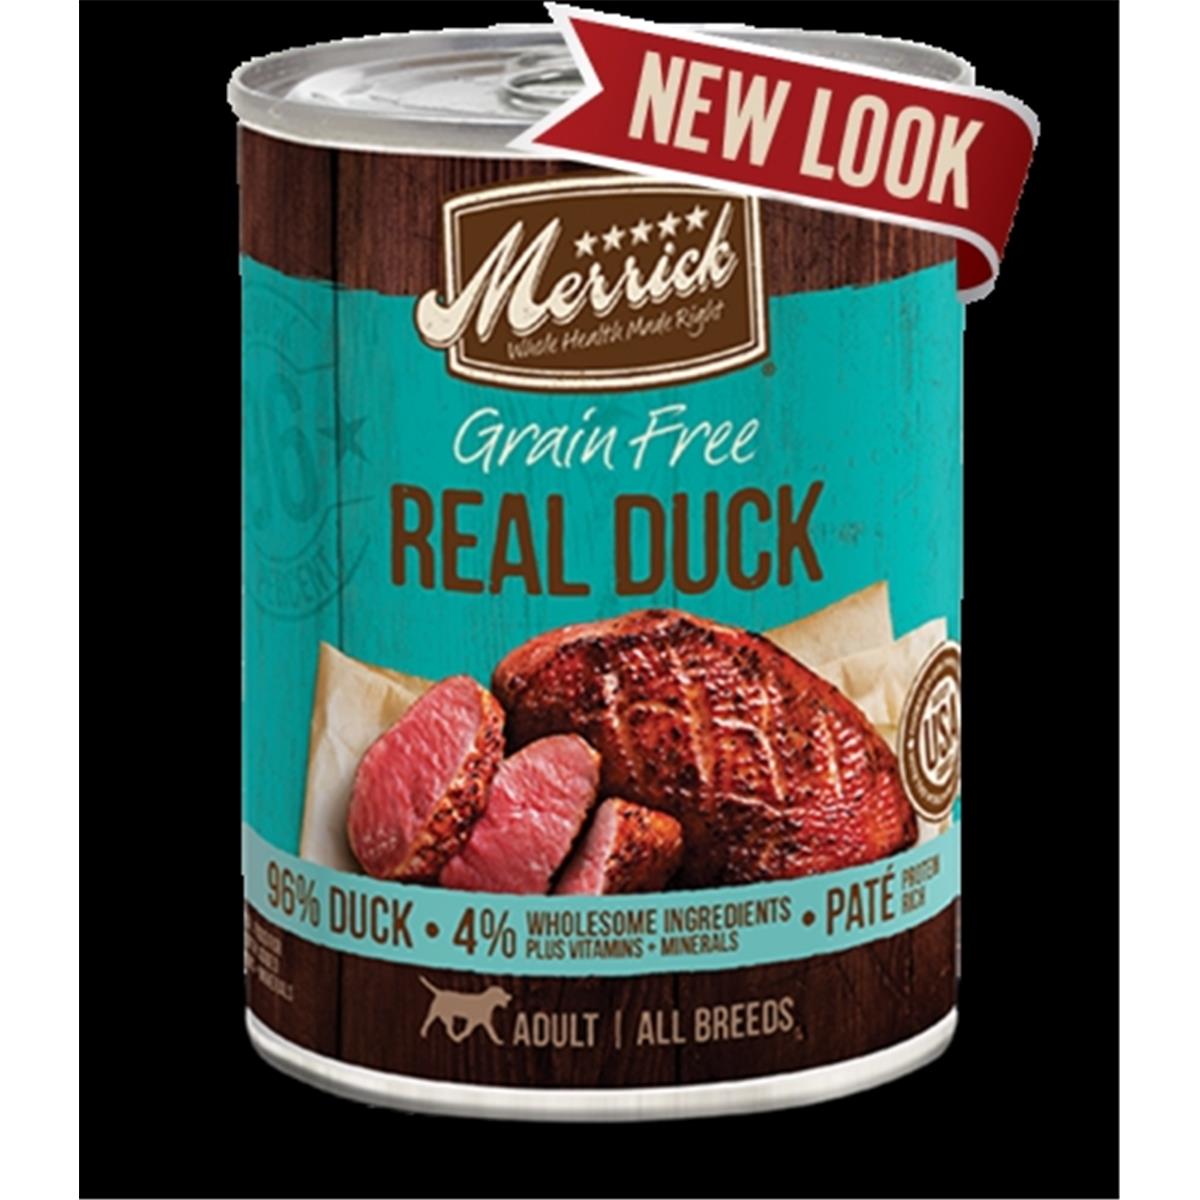 UPC 022808002123 product image for MP00212 12.7 oz Grain Free Real Duck Can - Case of 12 | upcitemdb.com